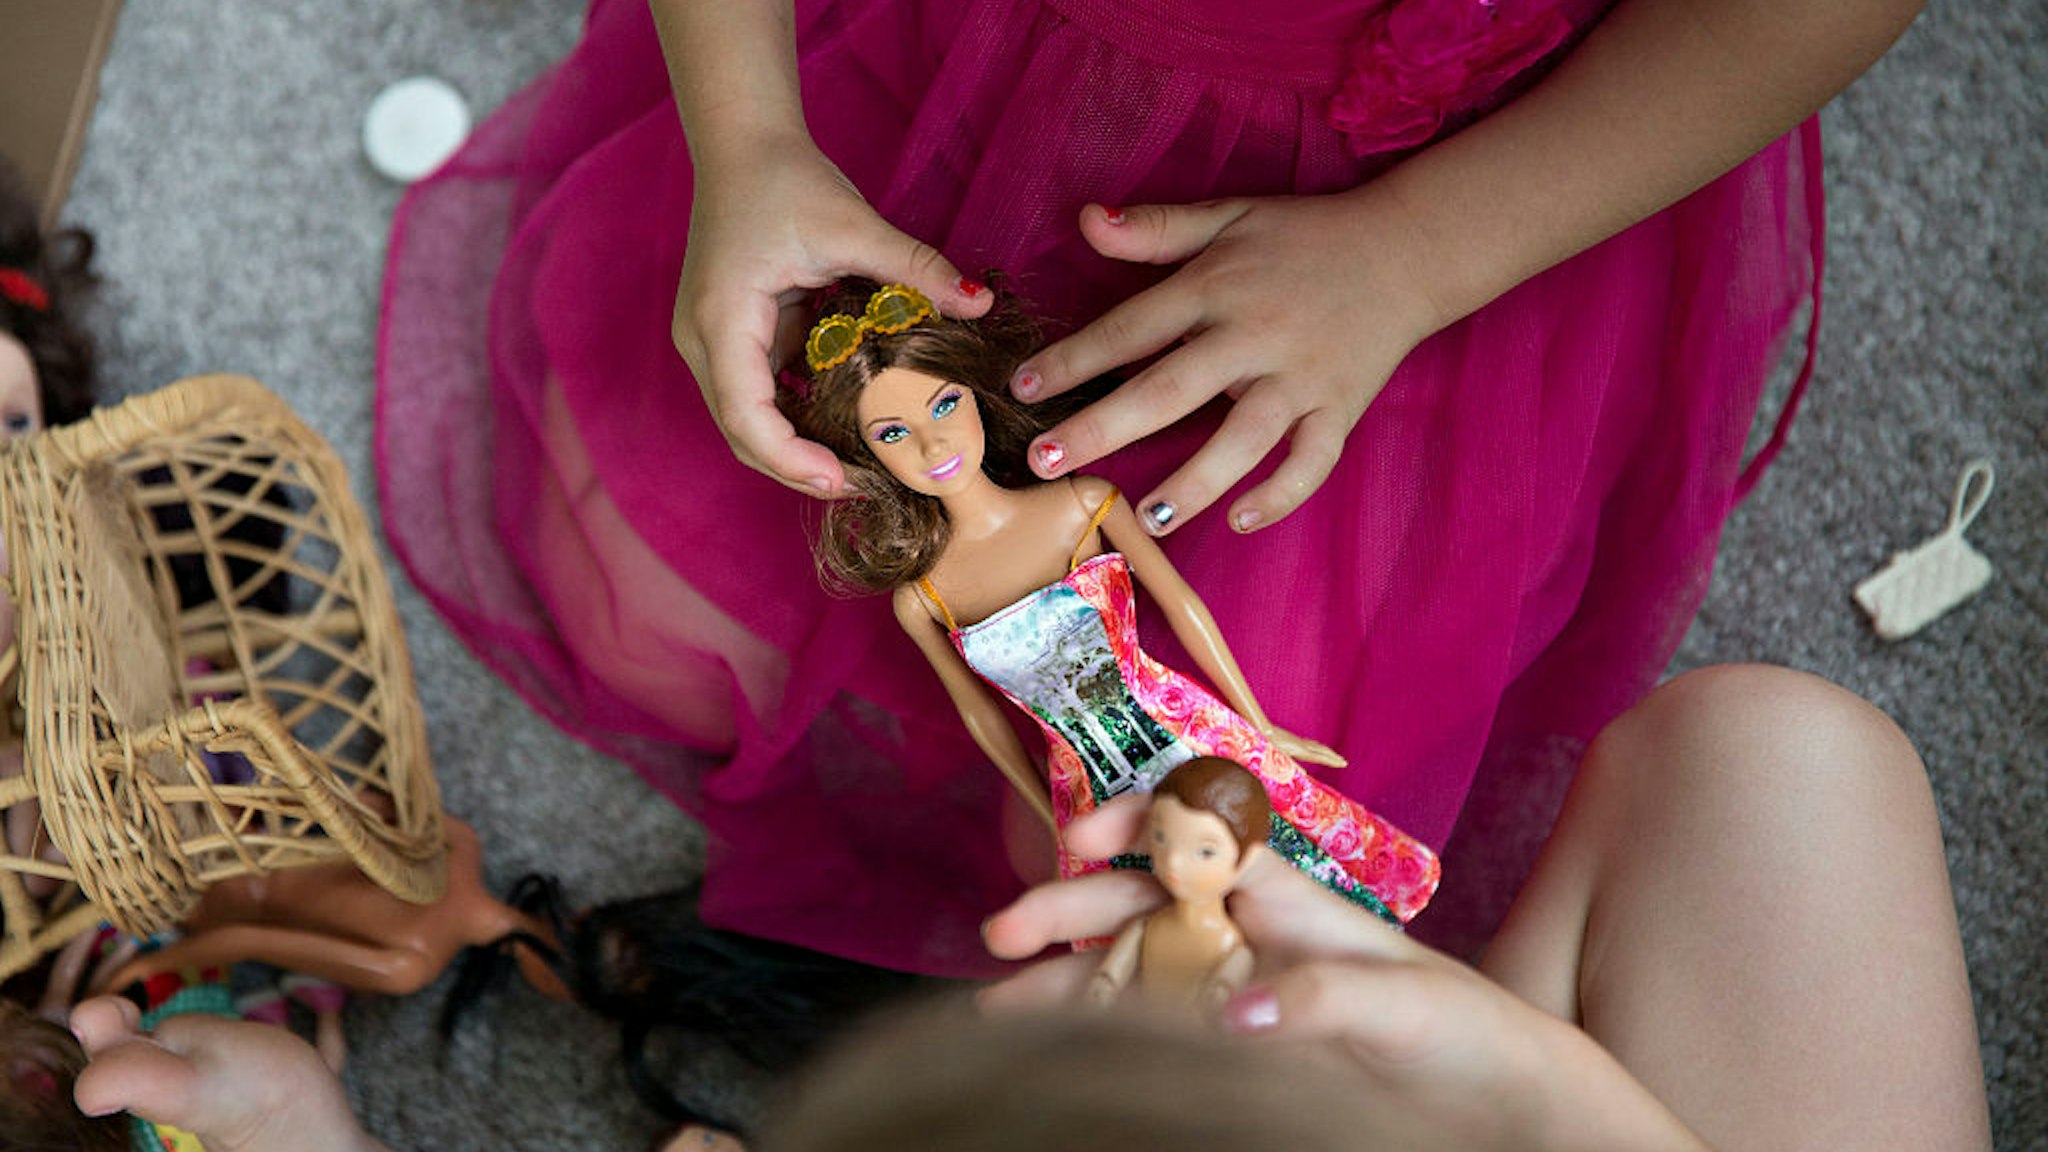 A young girl plays with a Mattel Inc. Barbie doll in Tiskilwa, Illinois, U.S., on Wednesday, July 1, 2015. Mattel Inc. is expected to report quarterly earnings on July 16, 2015. Photographer: Daniel Acker/Bloomberg via Getty Images